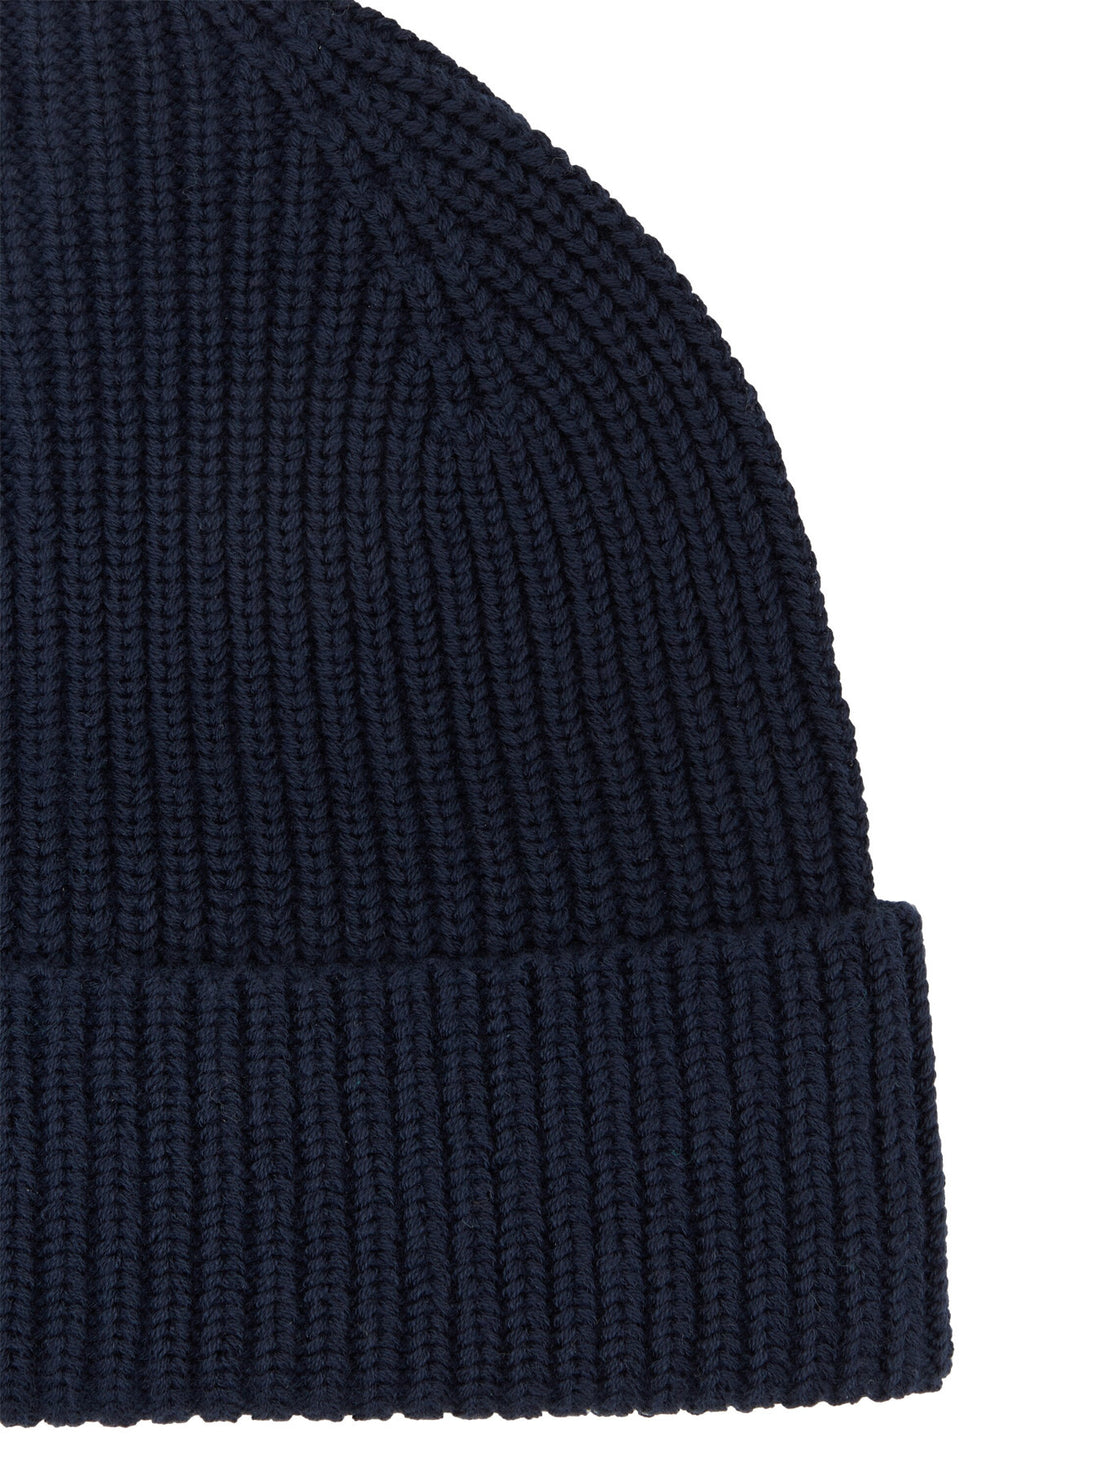 Knitted Hat_1039754_10668_02